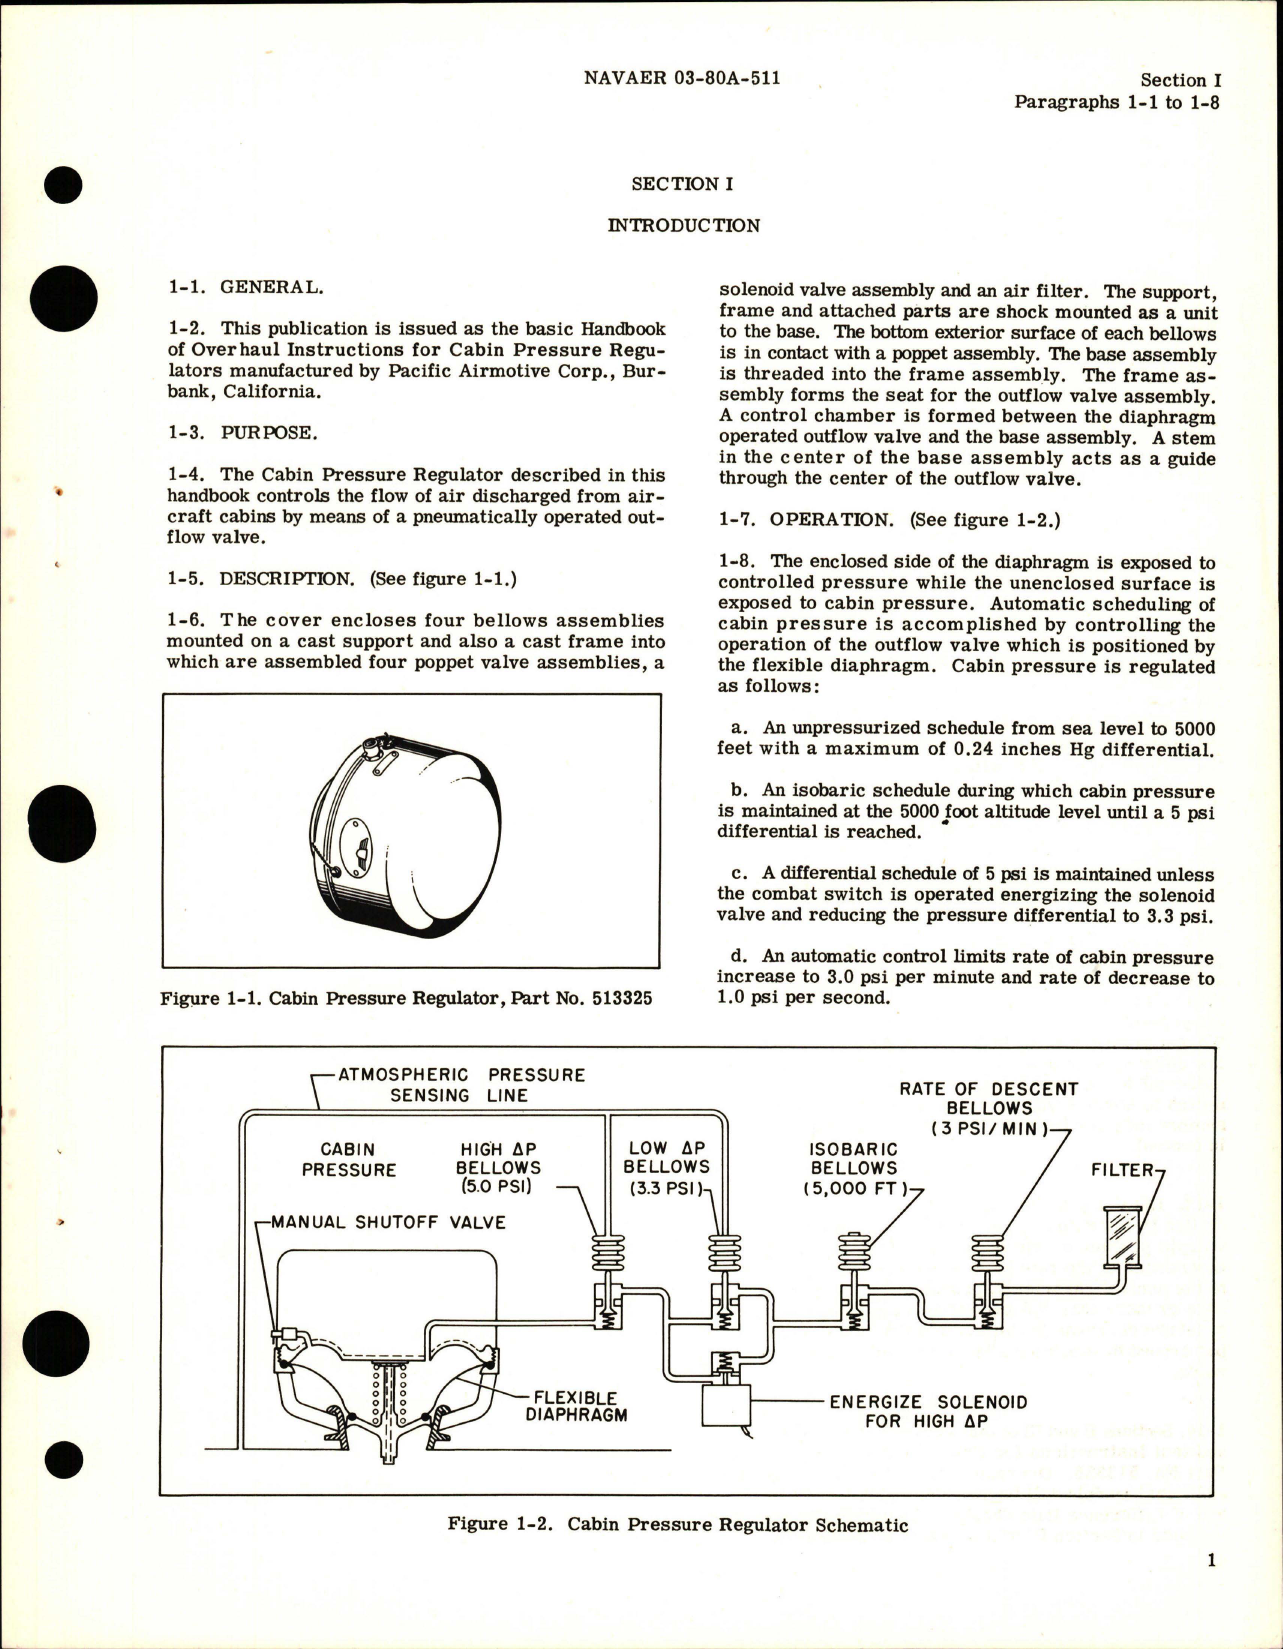 Sample page 5 from AirCorps Library document: Overhaul Instructions for Cabin Pressure Regulator - Part 513325 